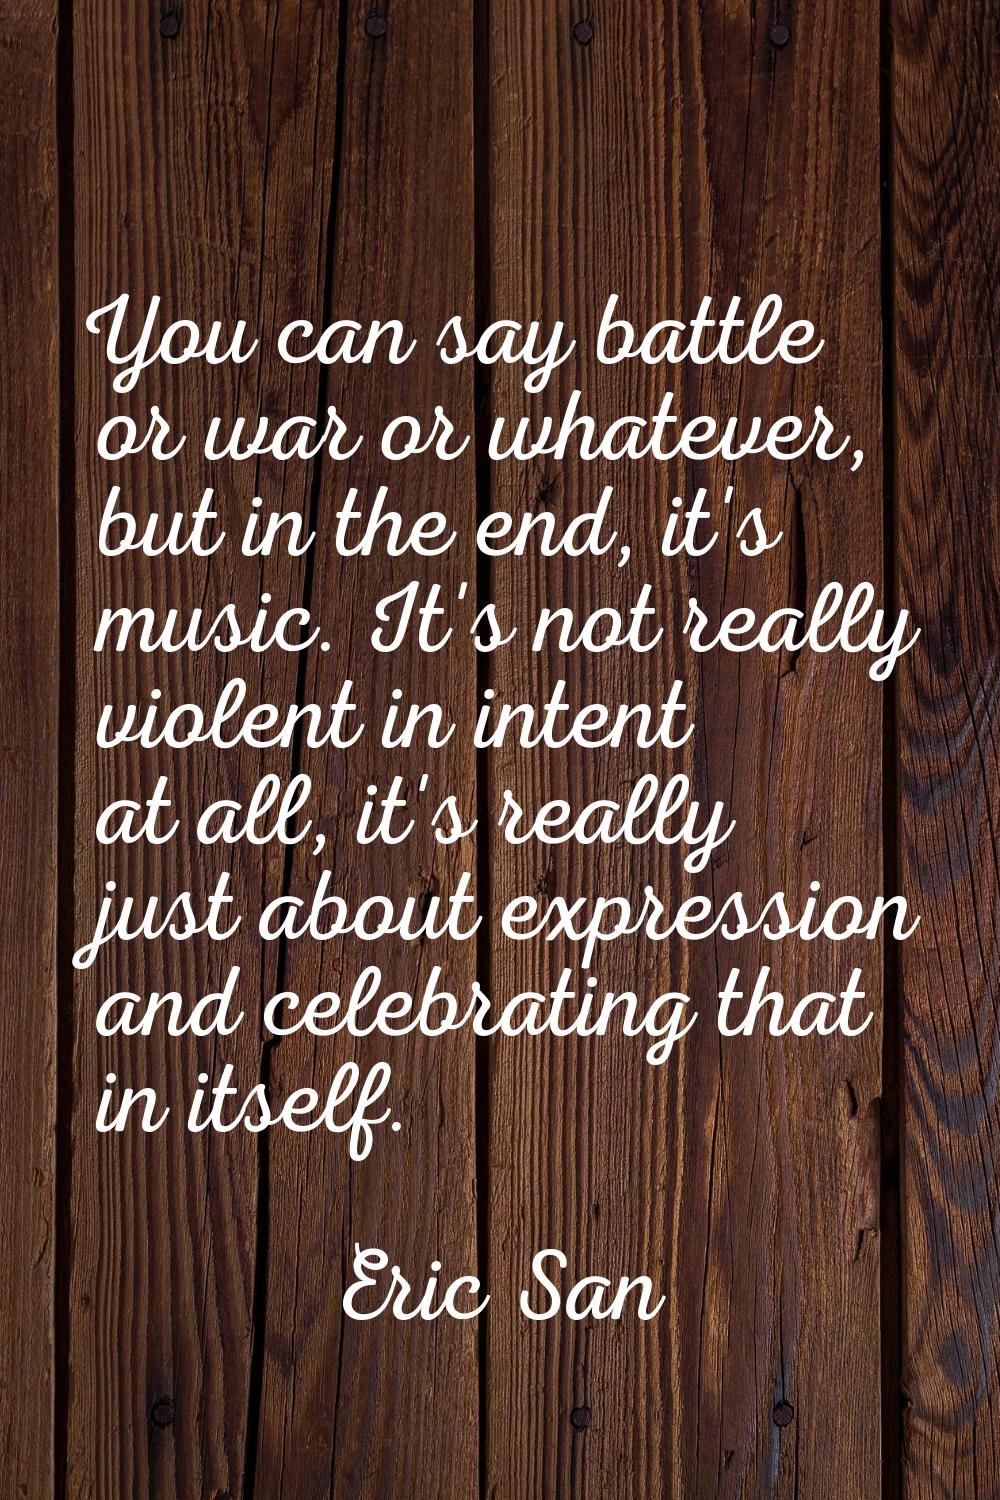 You can say battle or war or whatever, but in the end, it's music. It's not really violent in inten